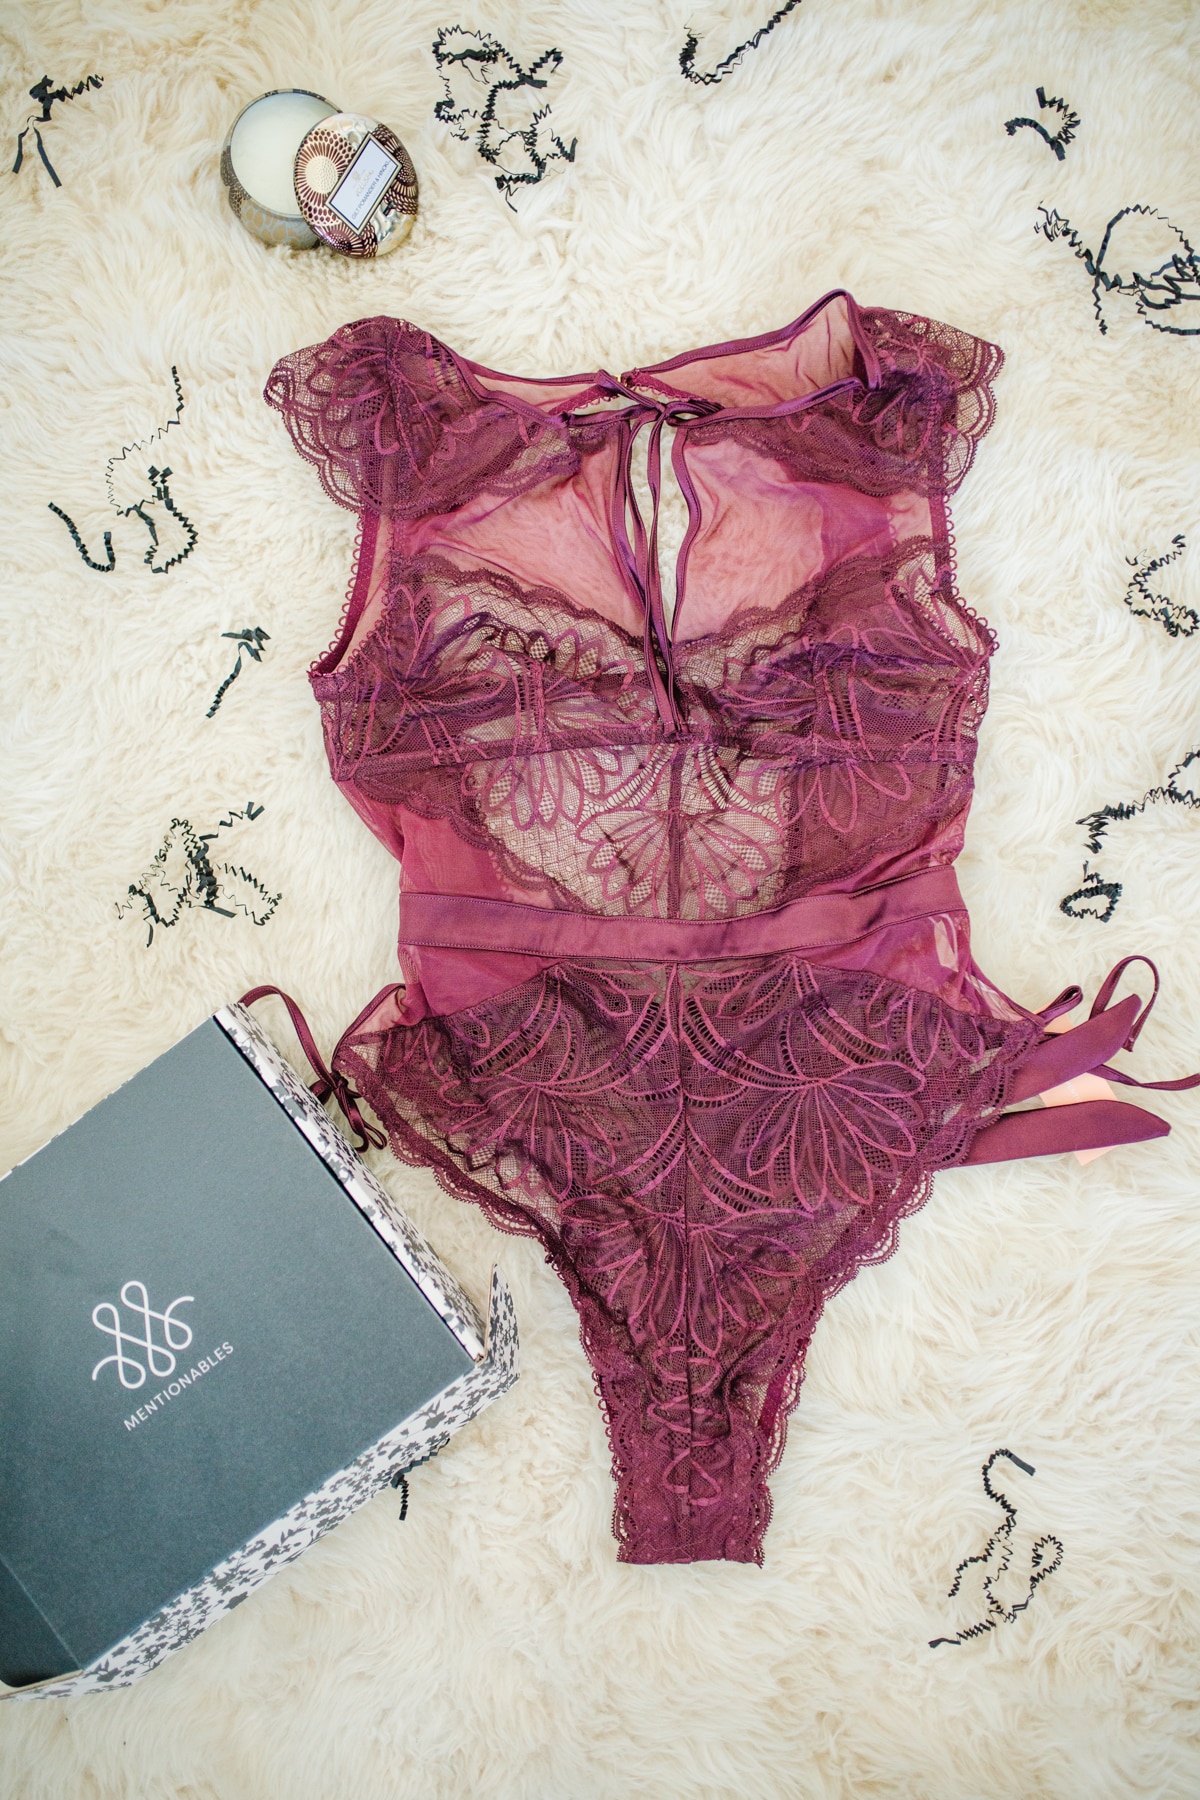 Purple lace Size Inclusive lingerie by Mentionables on a fuzzy rug with a lingerie box next to it. 